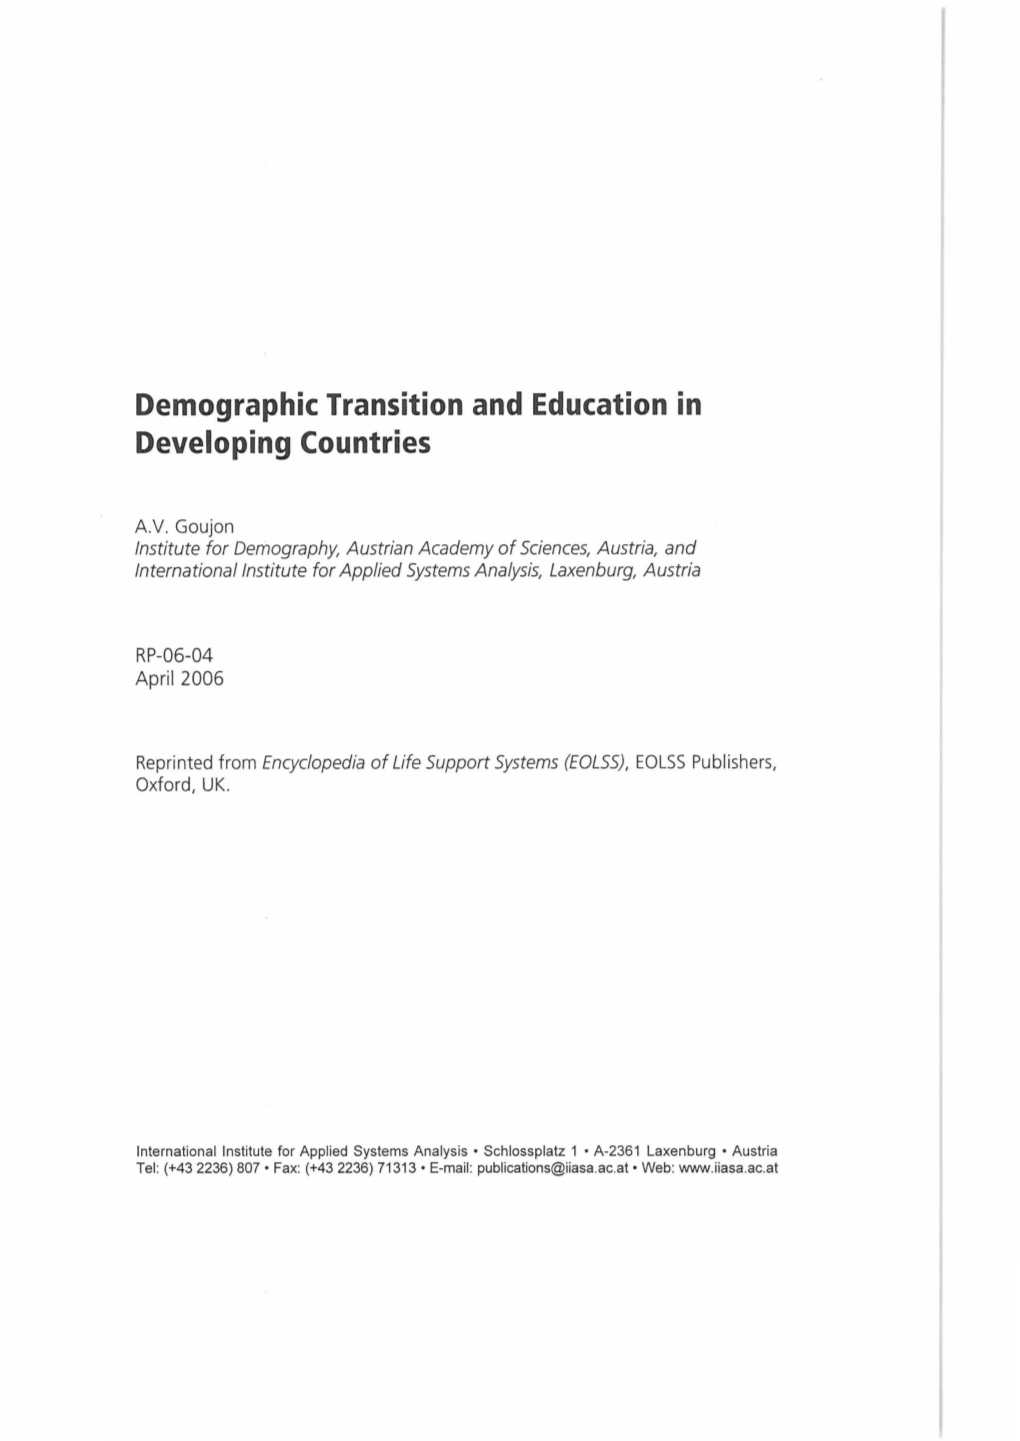 Demographic Transition and Education in Developing Countries